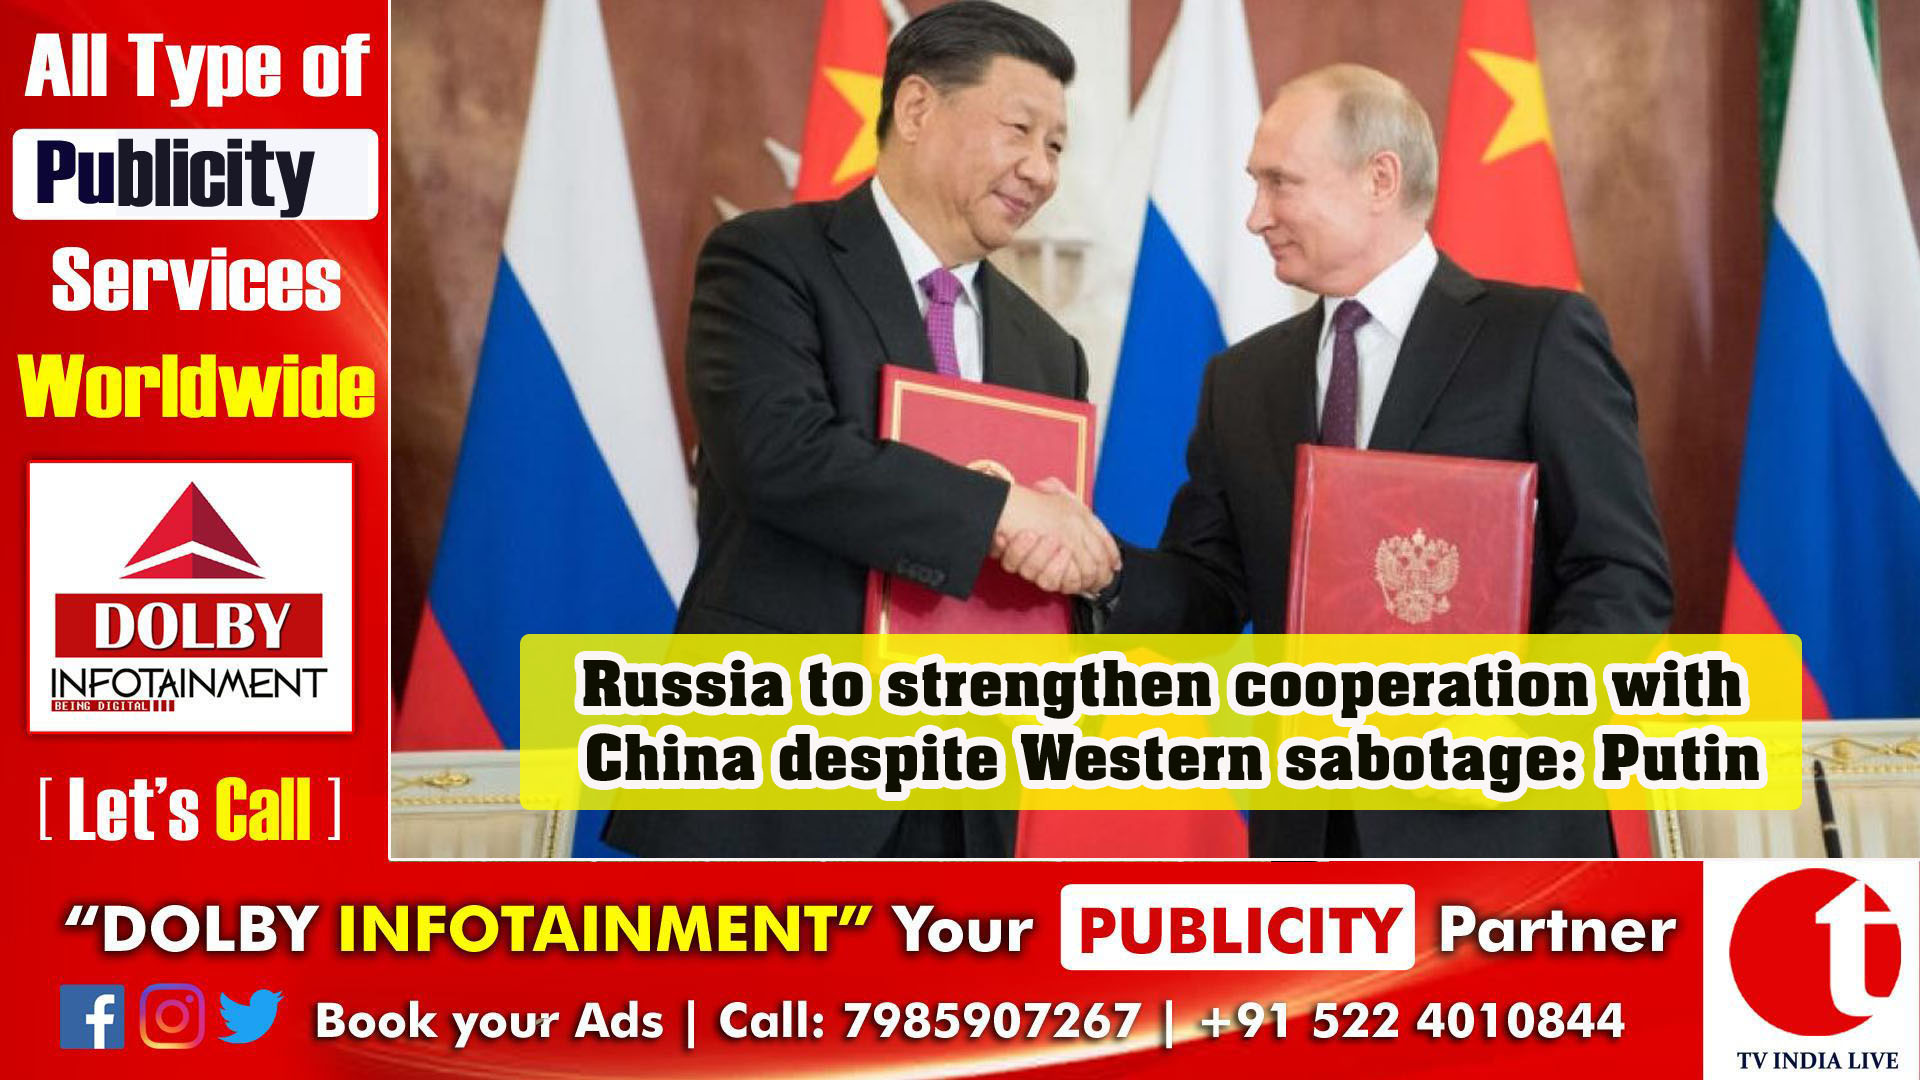 Russia to strengthen cooperation with China despite Western sabotage: Putin